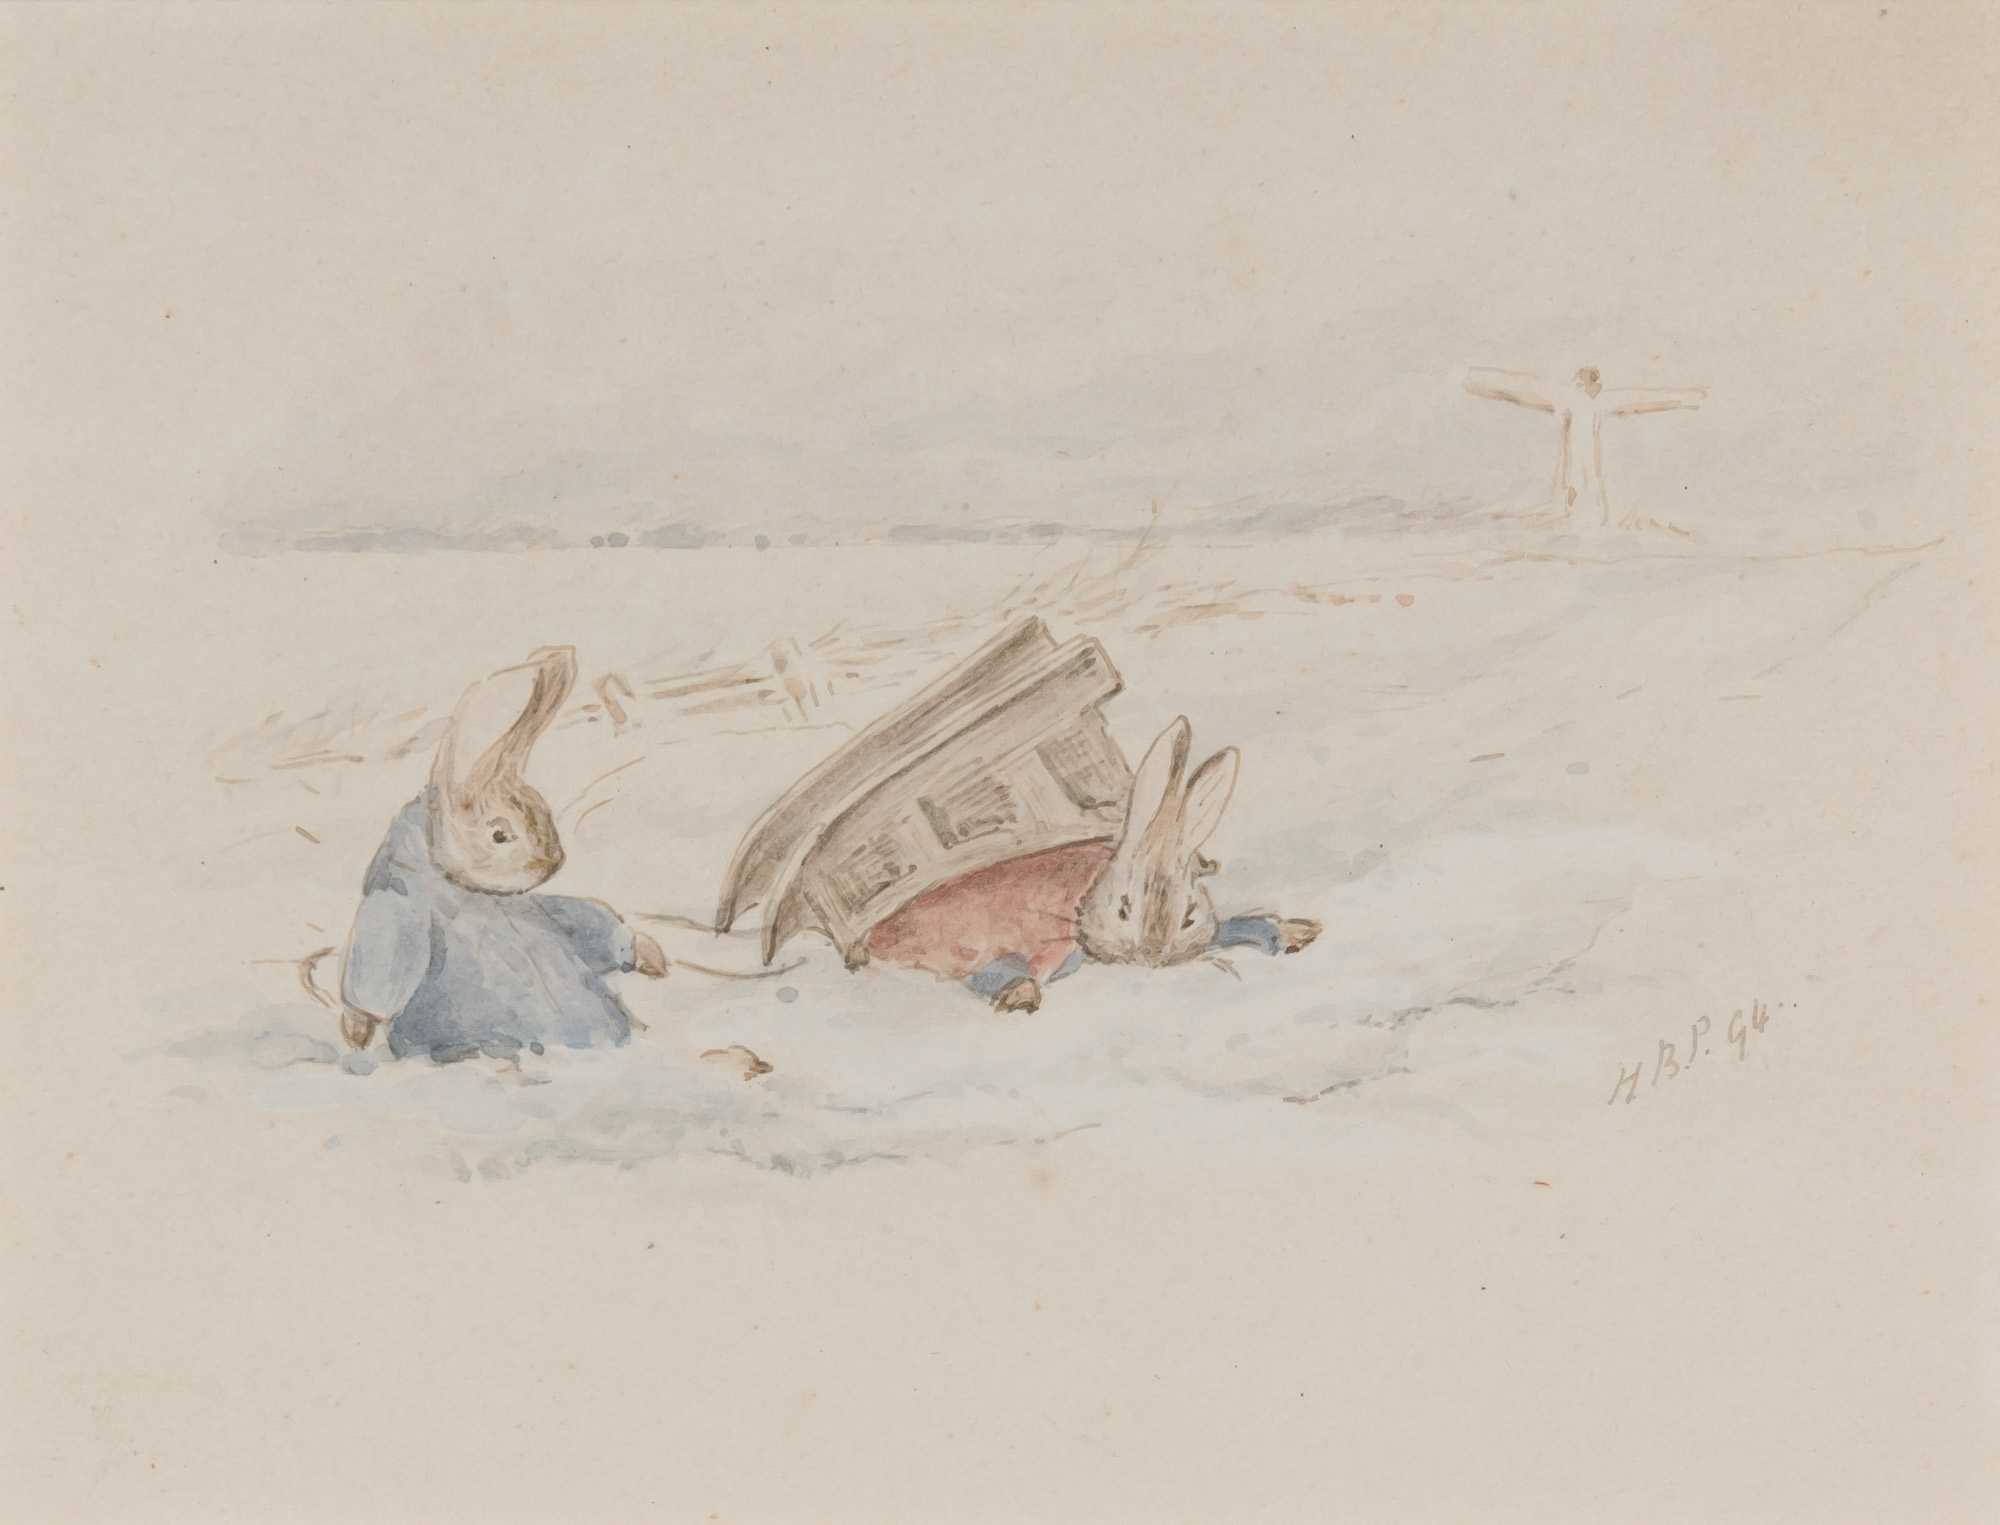 Peter Rabbit Sledging by Beatrix Potter - 1907 - 9 x 11 cm private collection